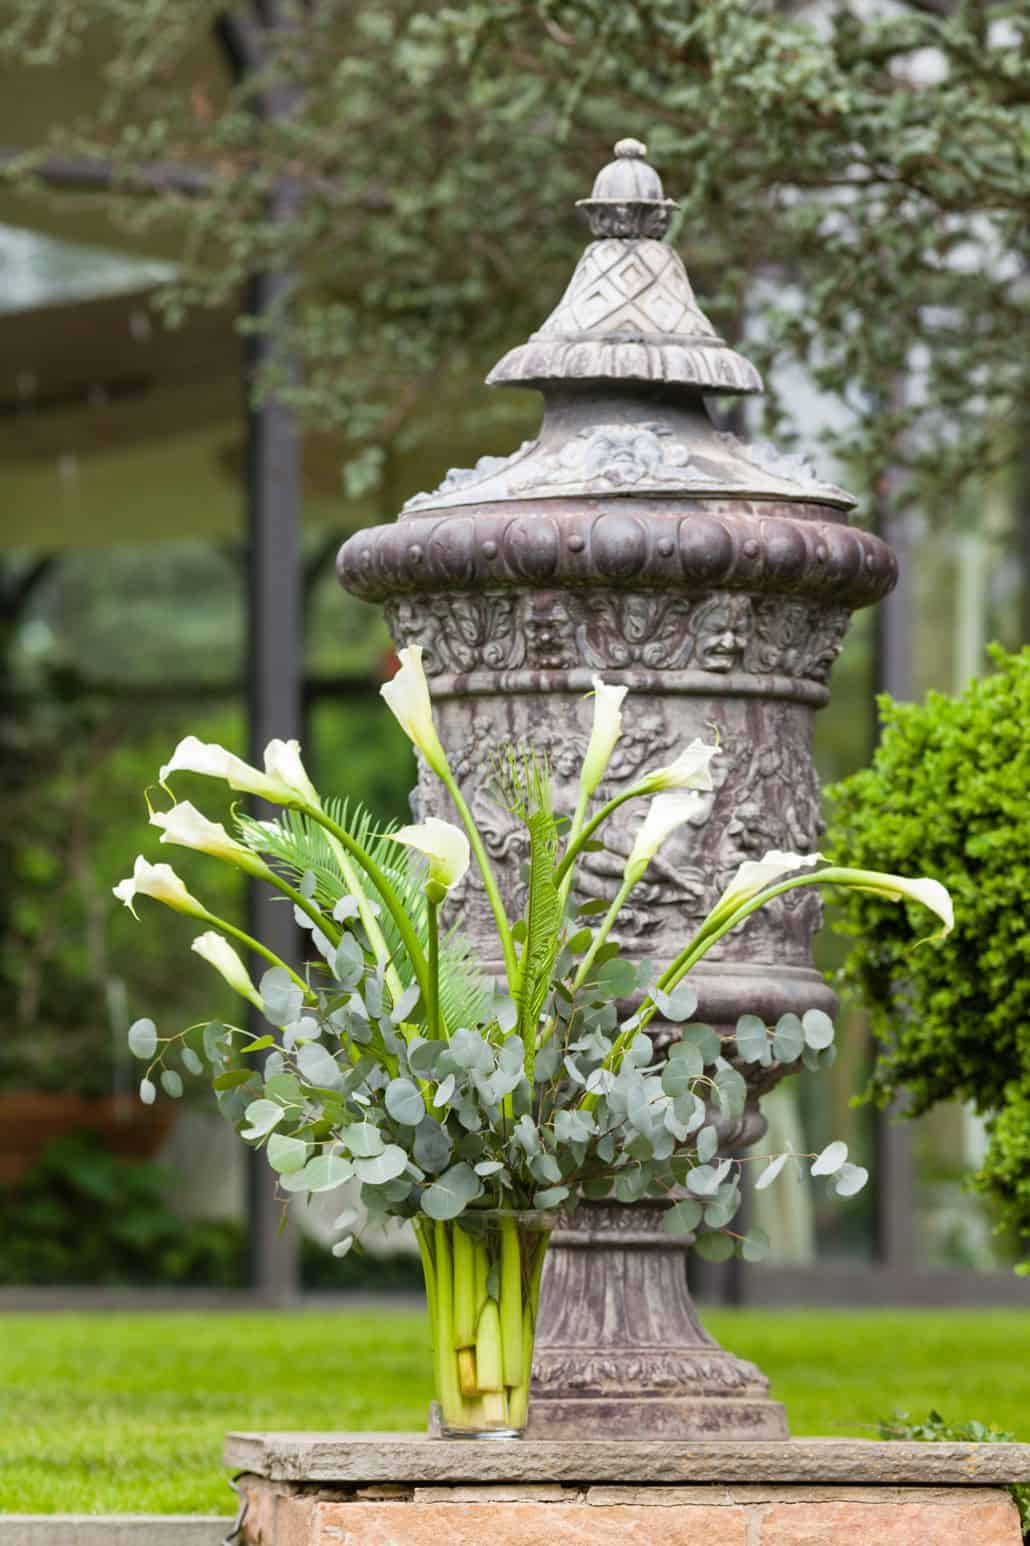 Calla Lily, fern and eucalyptus floral arranement in front of large urn at Jasna Polana wedding, Princeton, NJ. Janet Makrancy's weddings and parties florist. New Jersey wedding photographer.